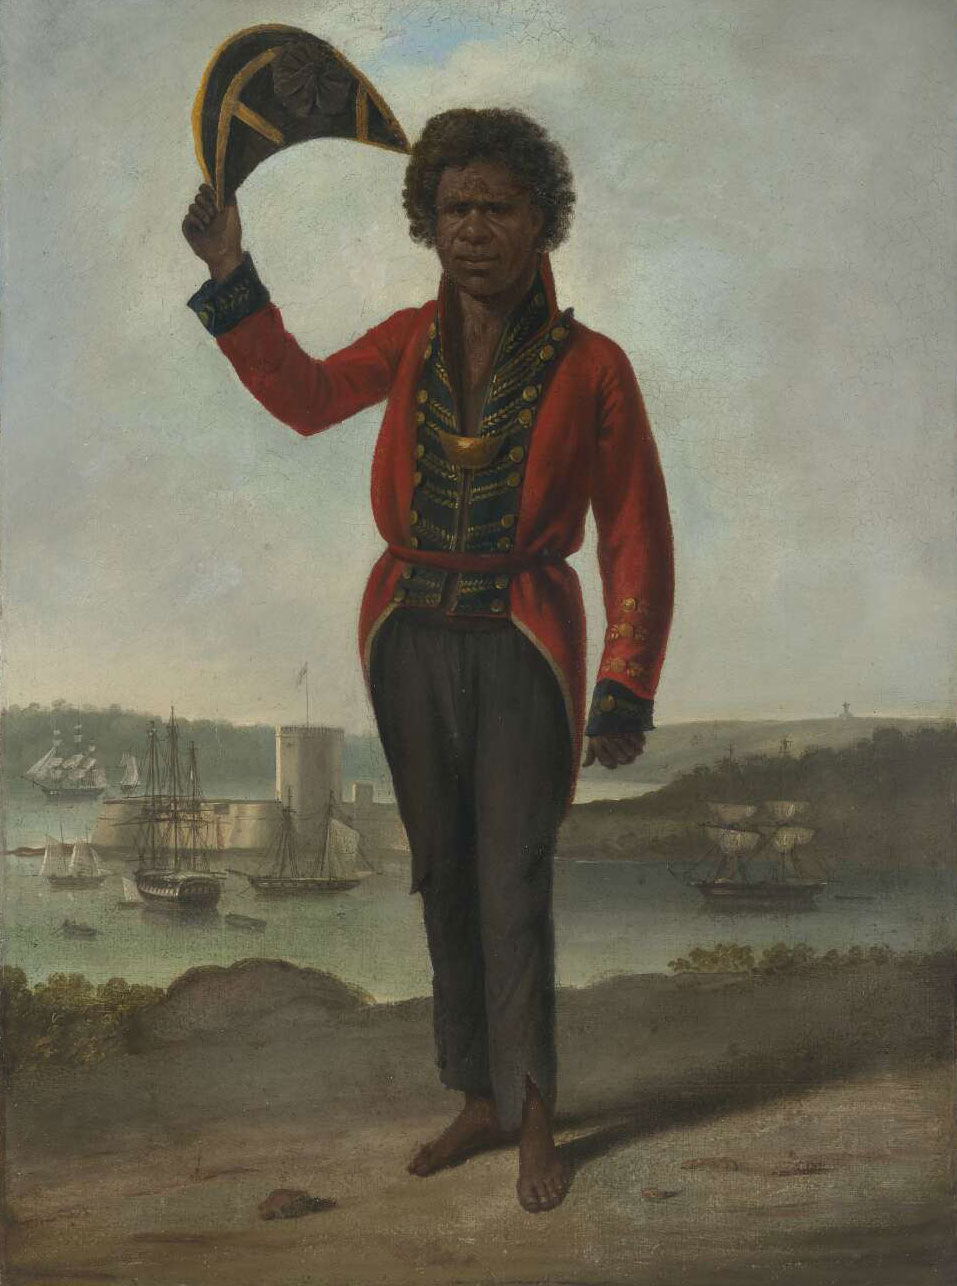 Painting of a man wearing 19th century clothing and a breastplate around his neck. In the background is a view of a harbour with various sailing vessels. - click to view larger image